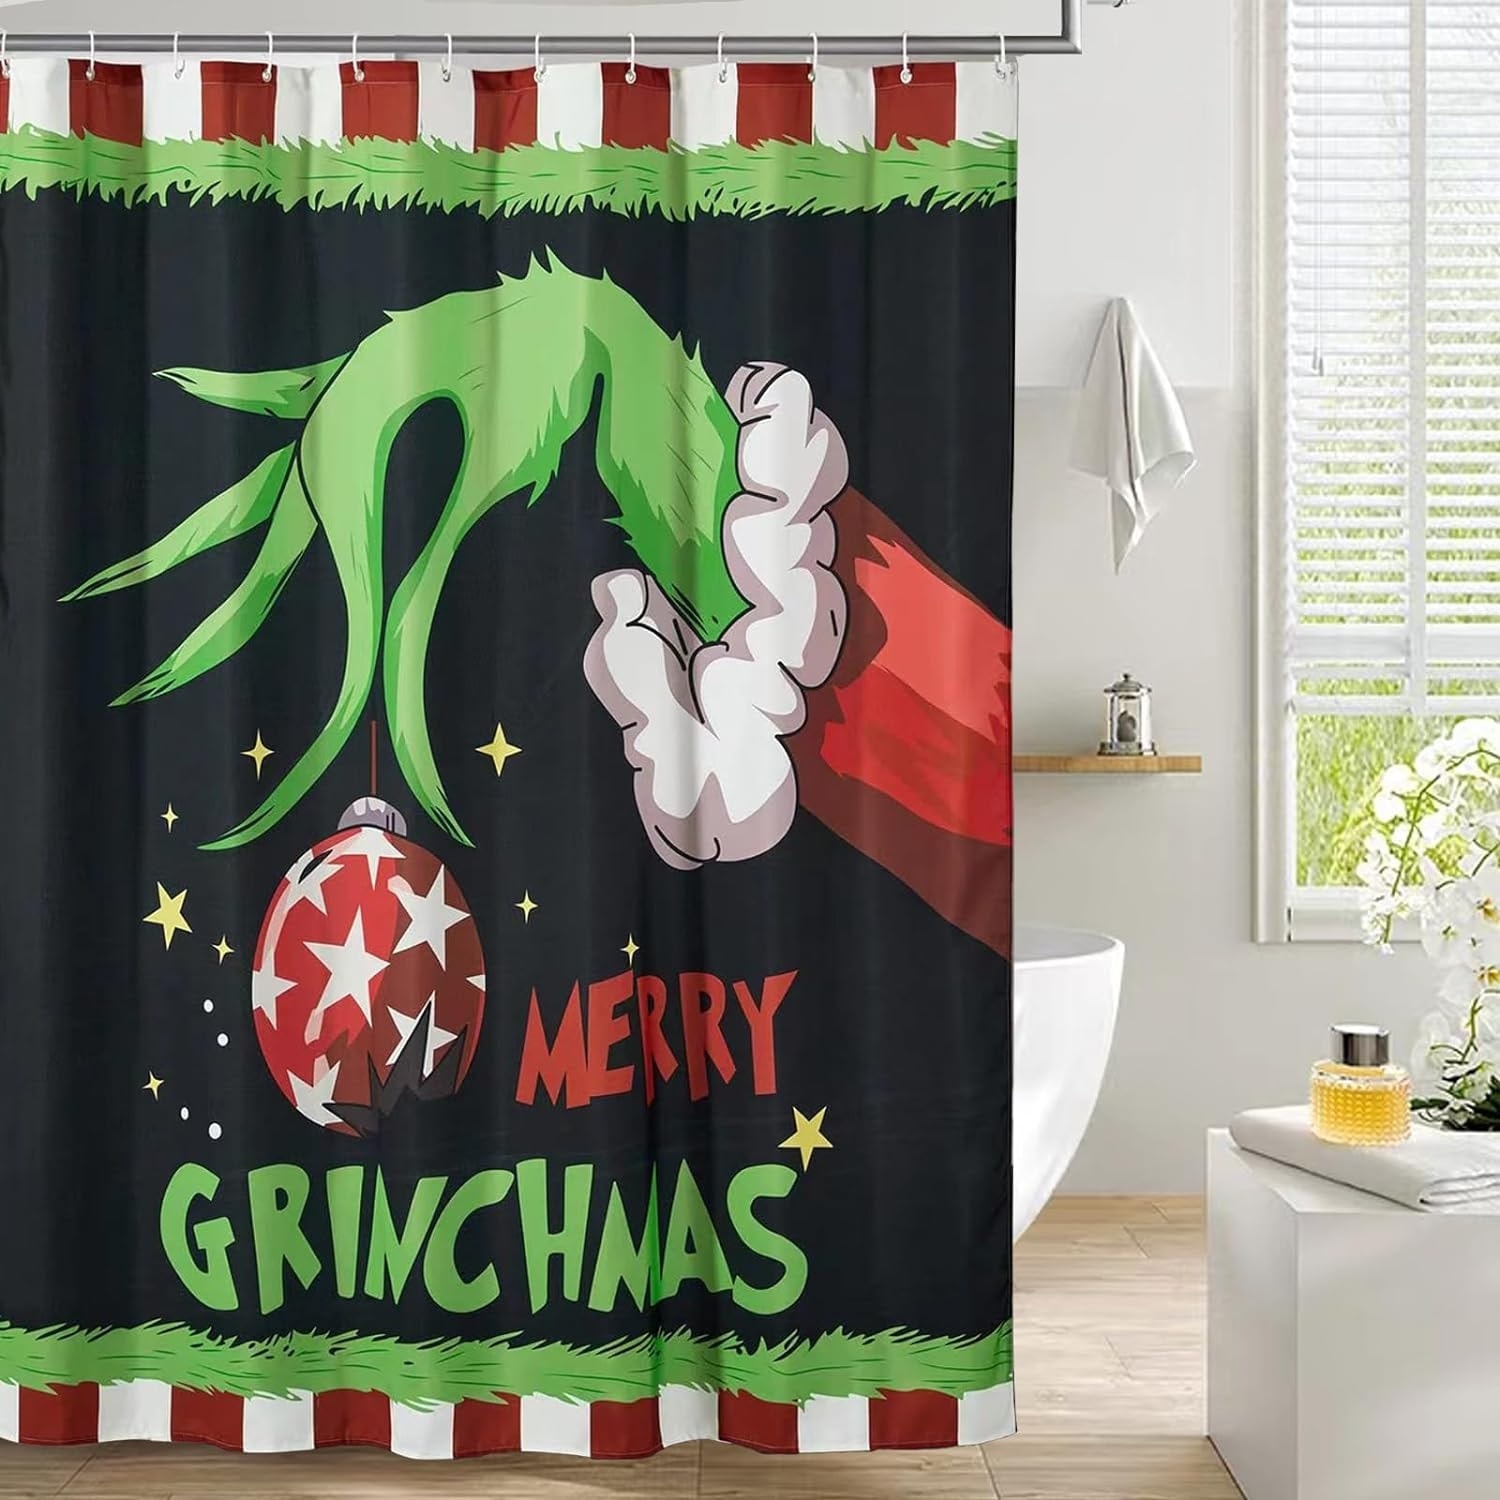 https://ak1.ostkcdn.com/images/products/is/images/direct/3c29f9828b6e34ca8adacd4e2dfb23d90a72e0bb/Grinch-Shower-Curtain-for-Bathroom-Christmas-Winter-New-Year-Set-Xmas.jpg